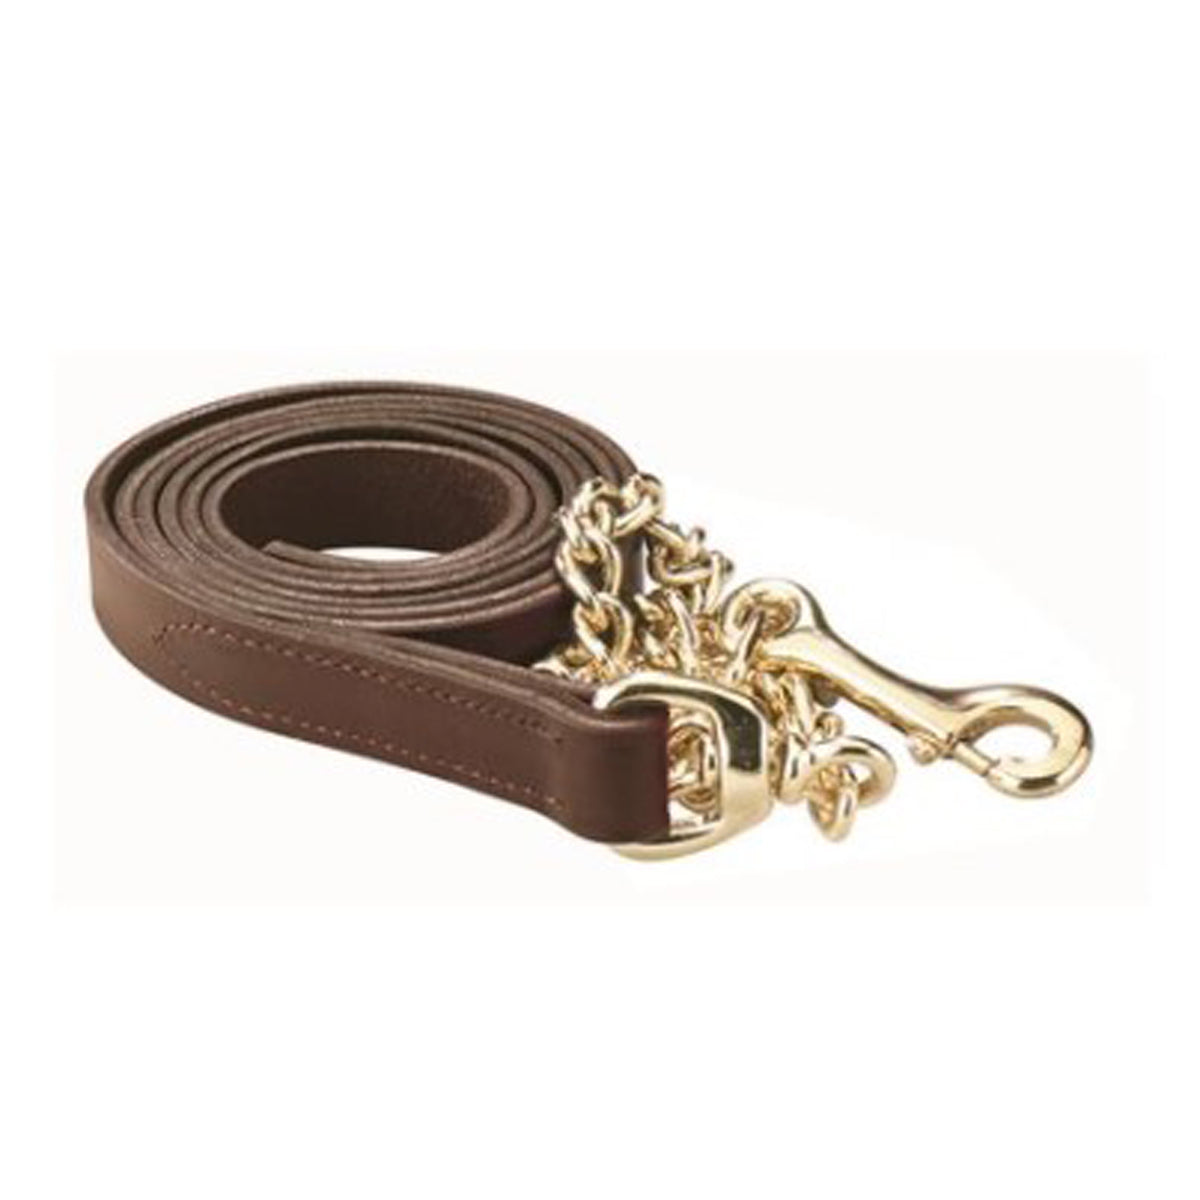 Perri's 1" Leather Lead with Chain